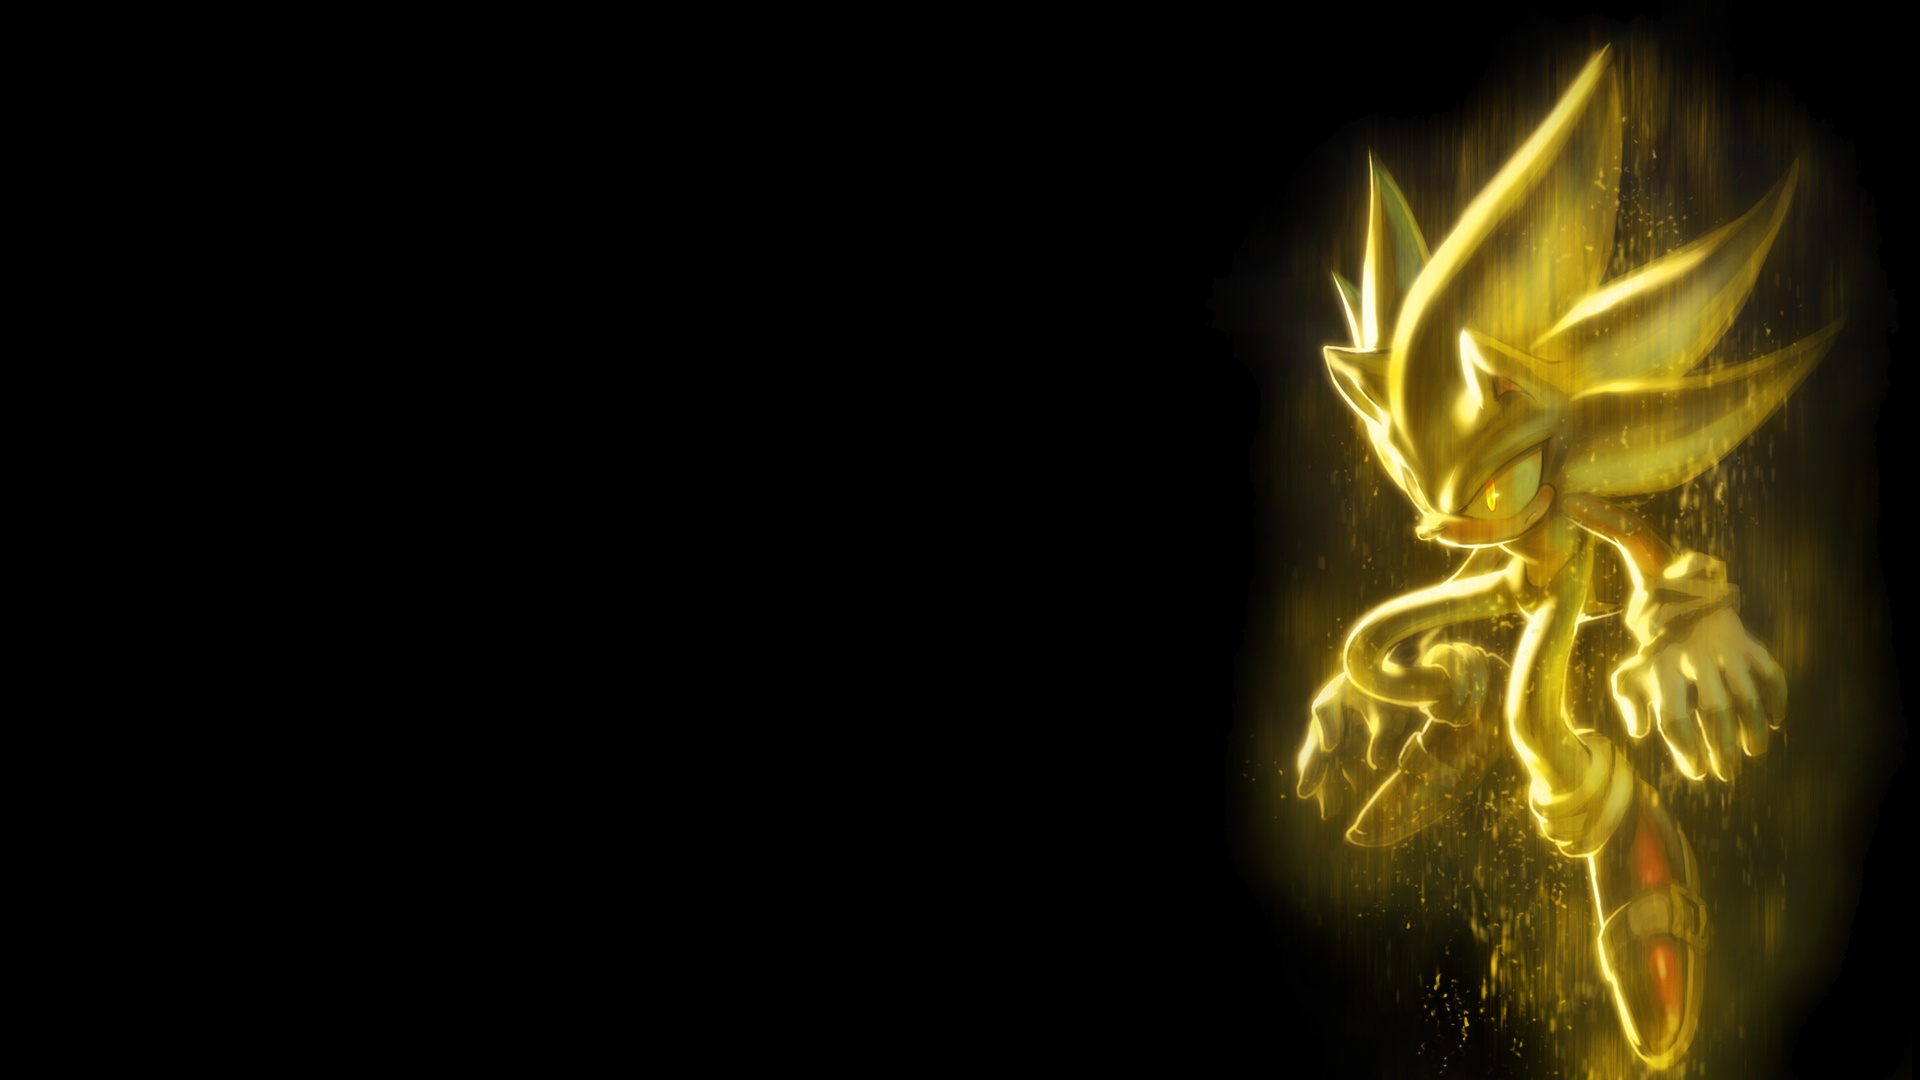 Super Sonic Digital Wallpapers Attachment 7412 - Amazing Wallpaperz